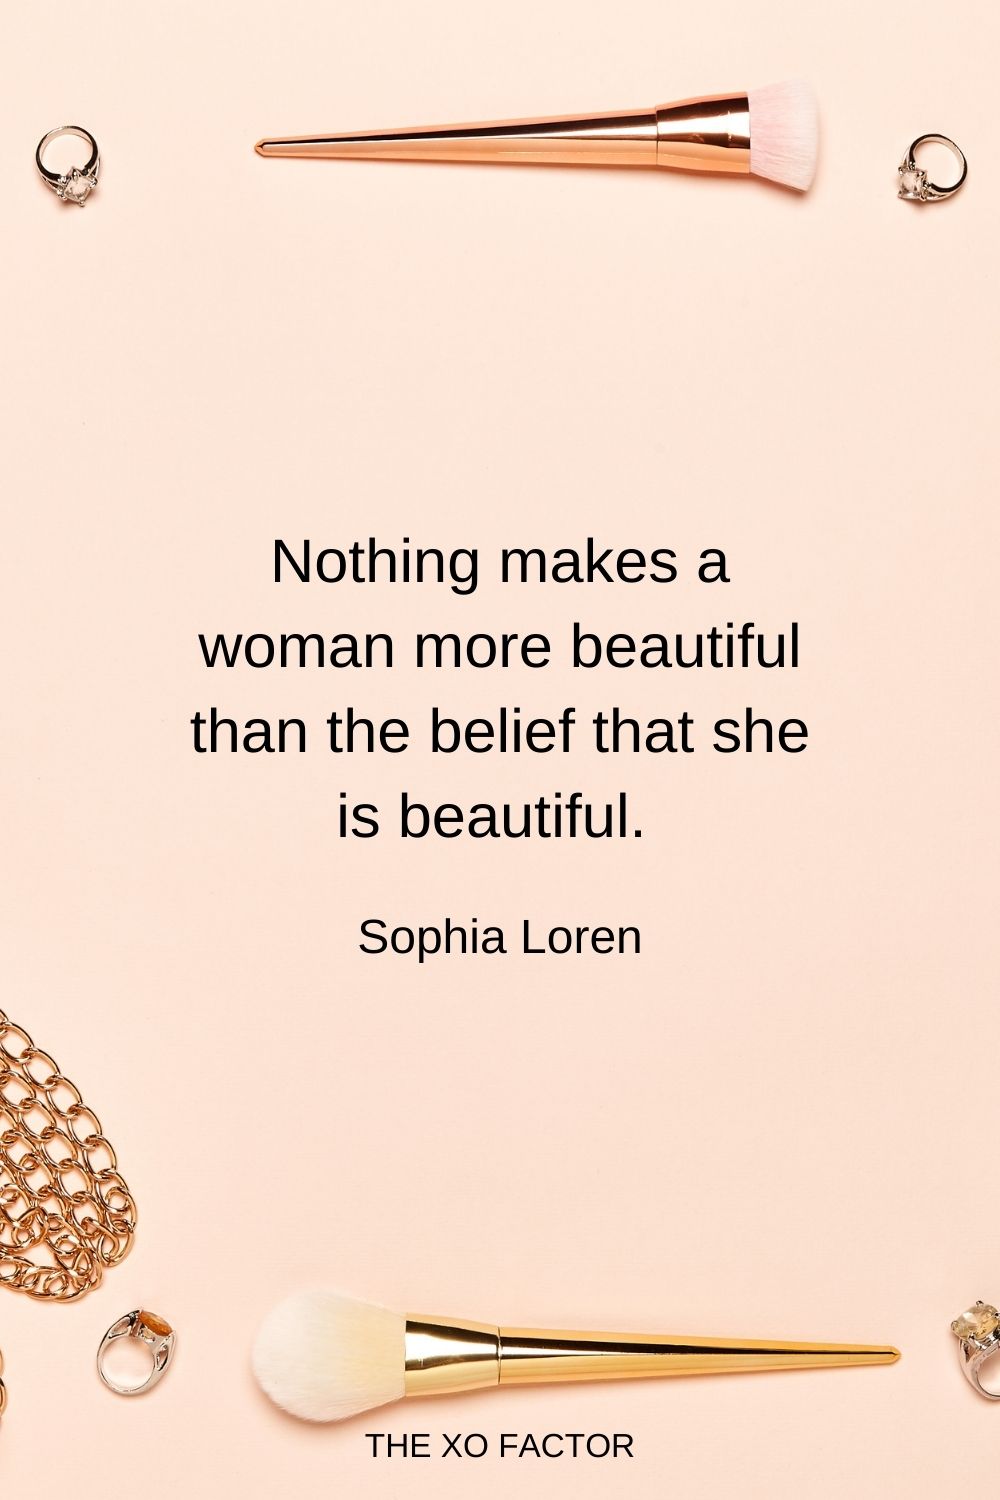 Nothing makes a woman more beautiful than the belief that she is beautiful.  Sophia Loren